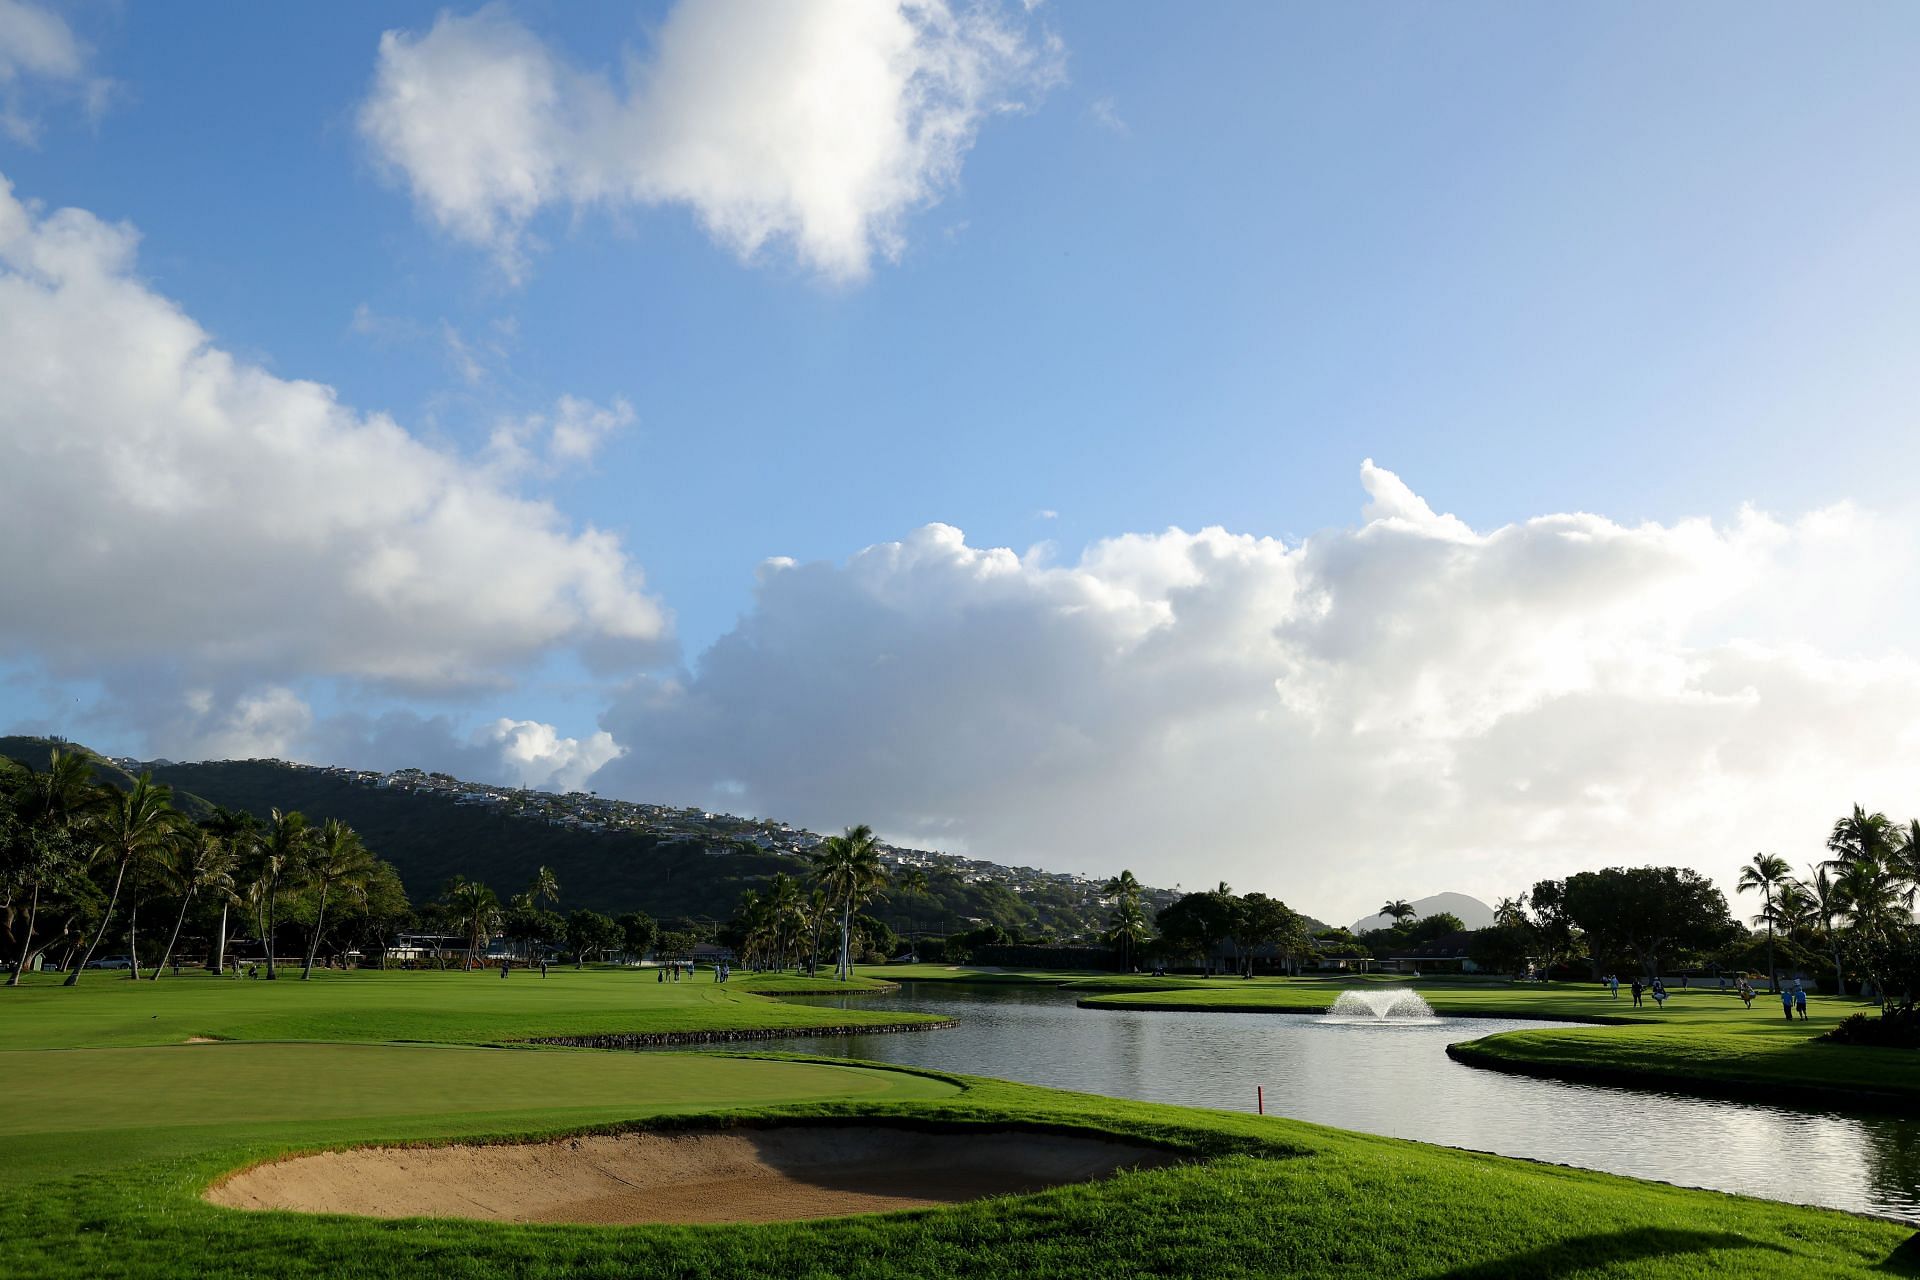 Sony Open in Hawaii - Round Two